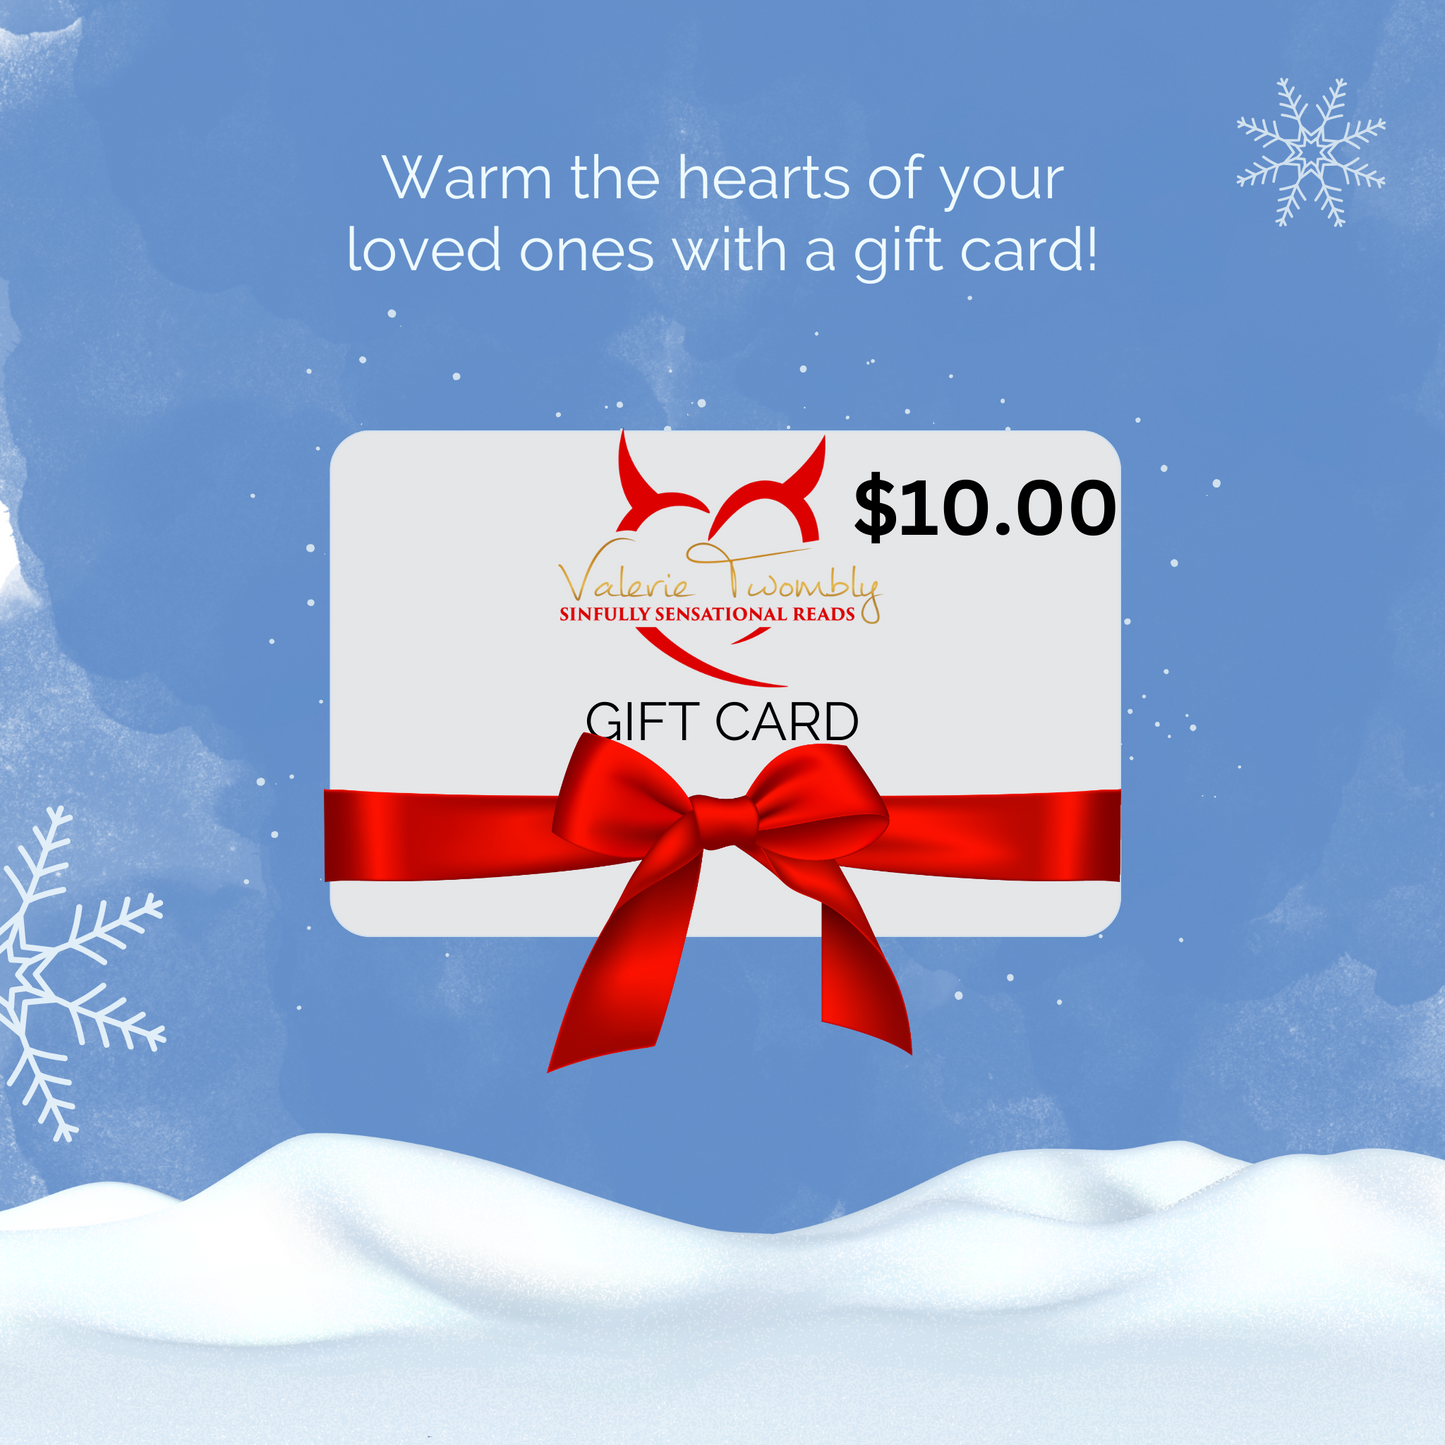 Valerie Twombly Books Gift Card